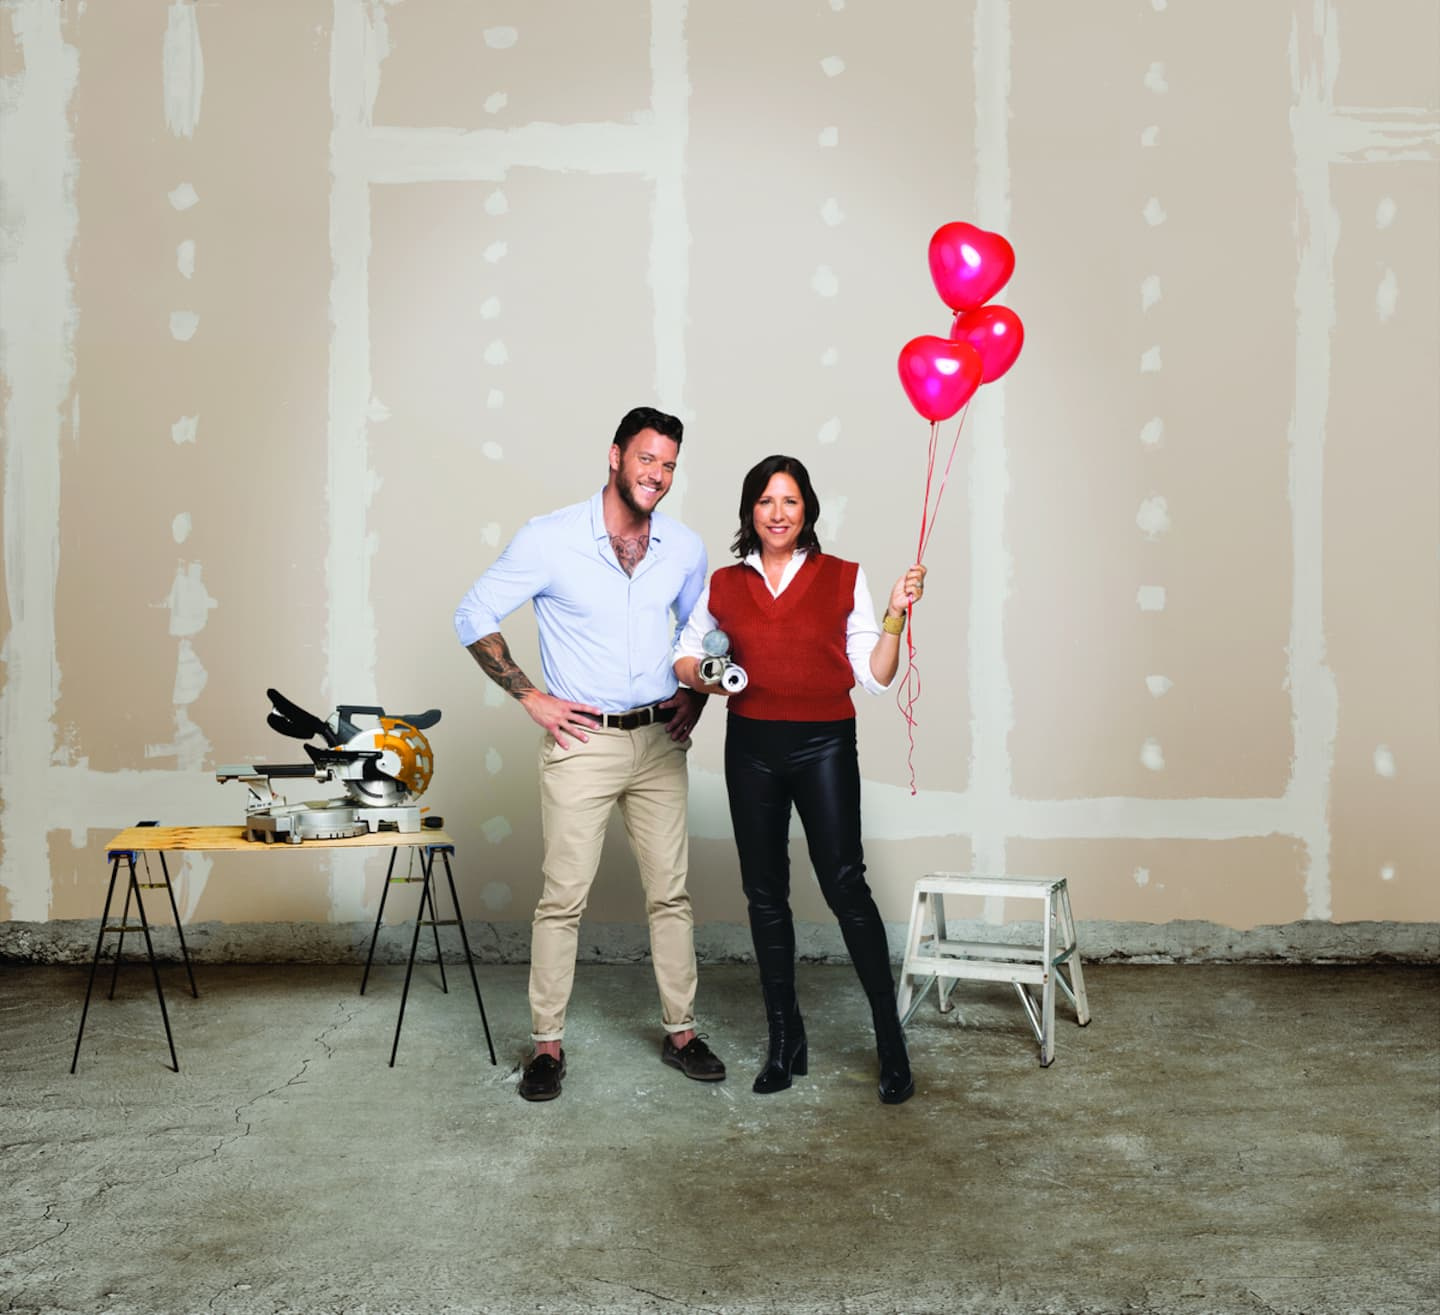 “When the walls fall” on CASA: renovating as a couple, an extreme sport